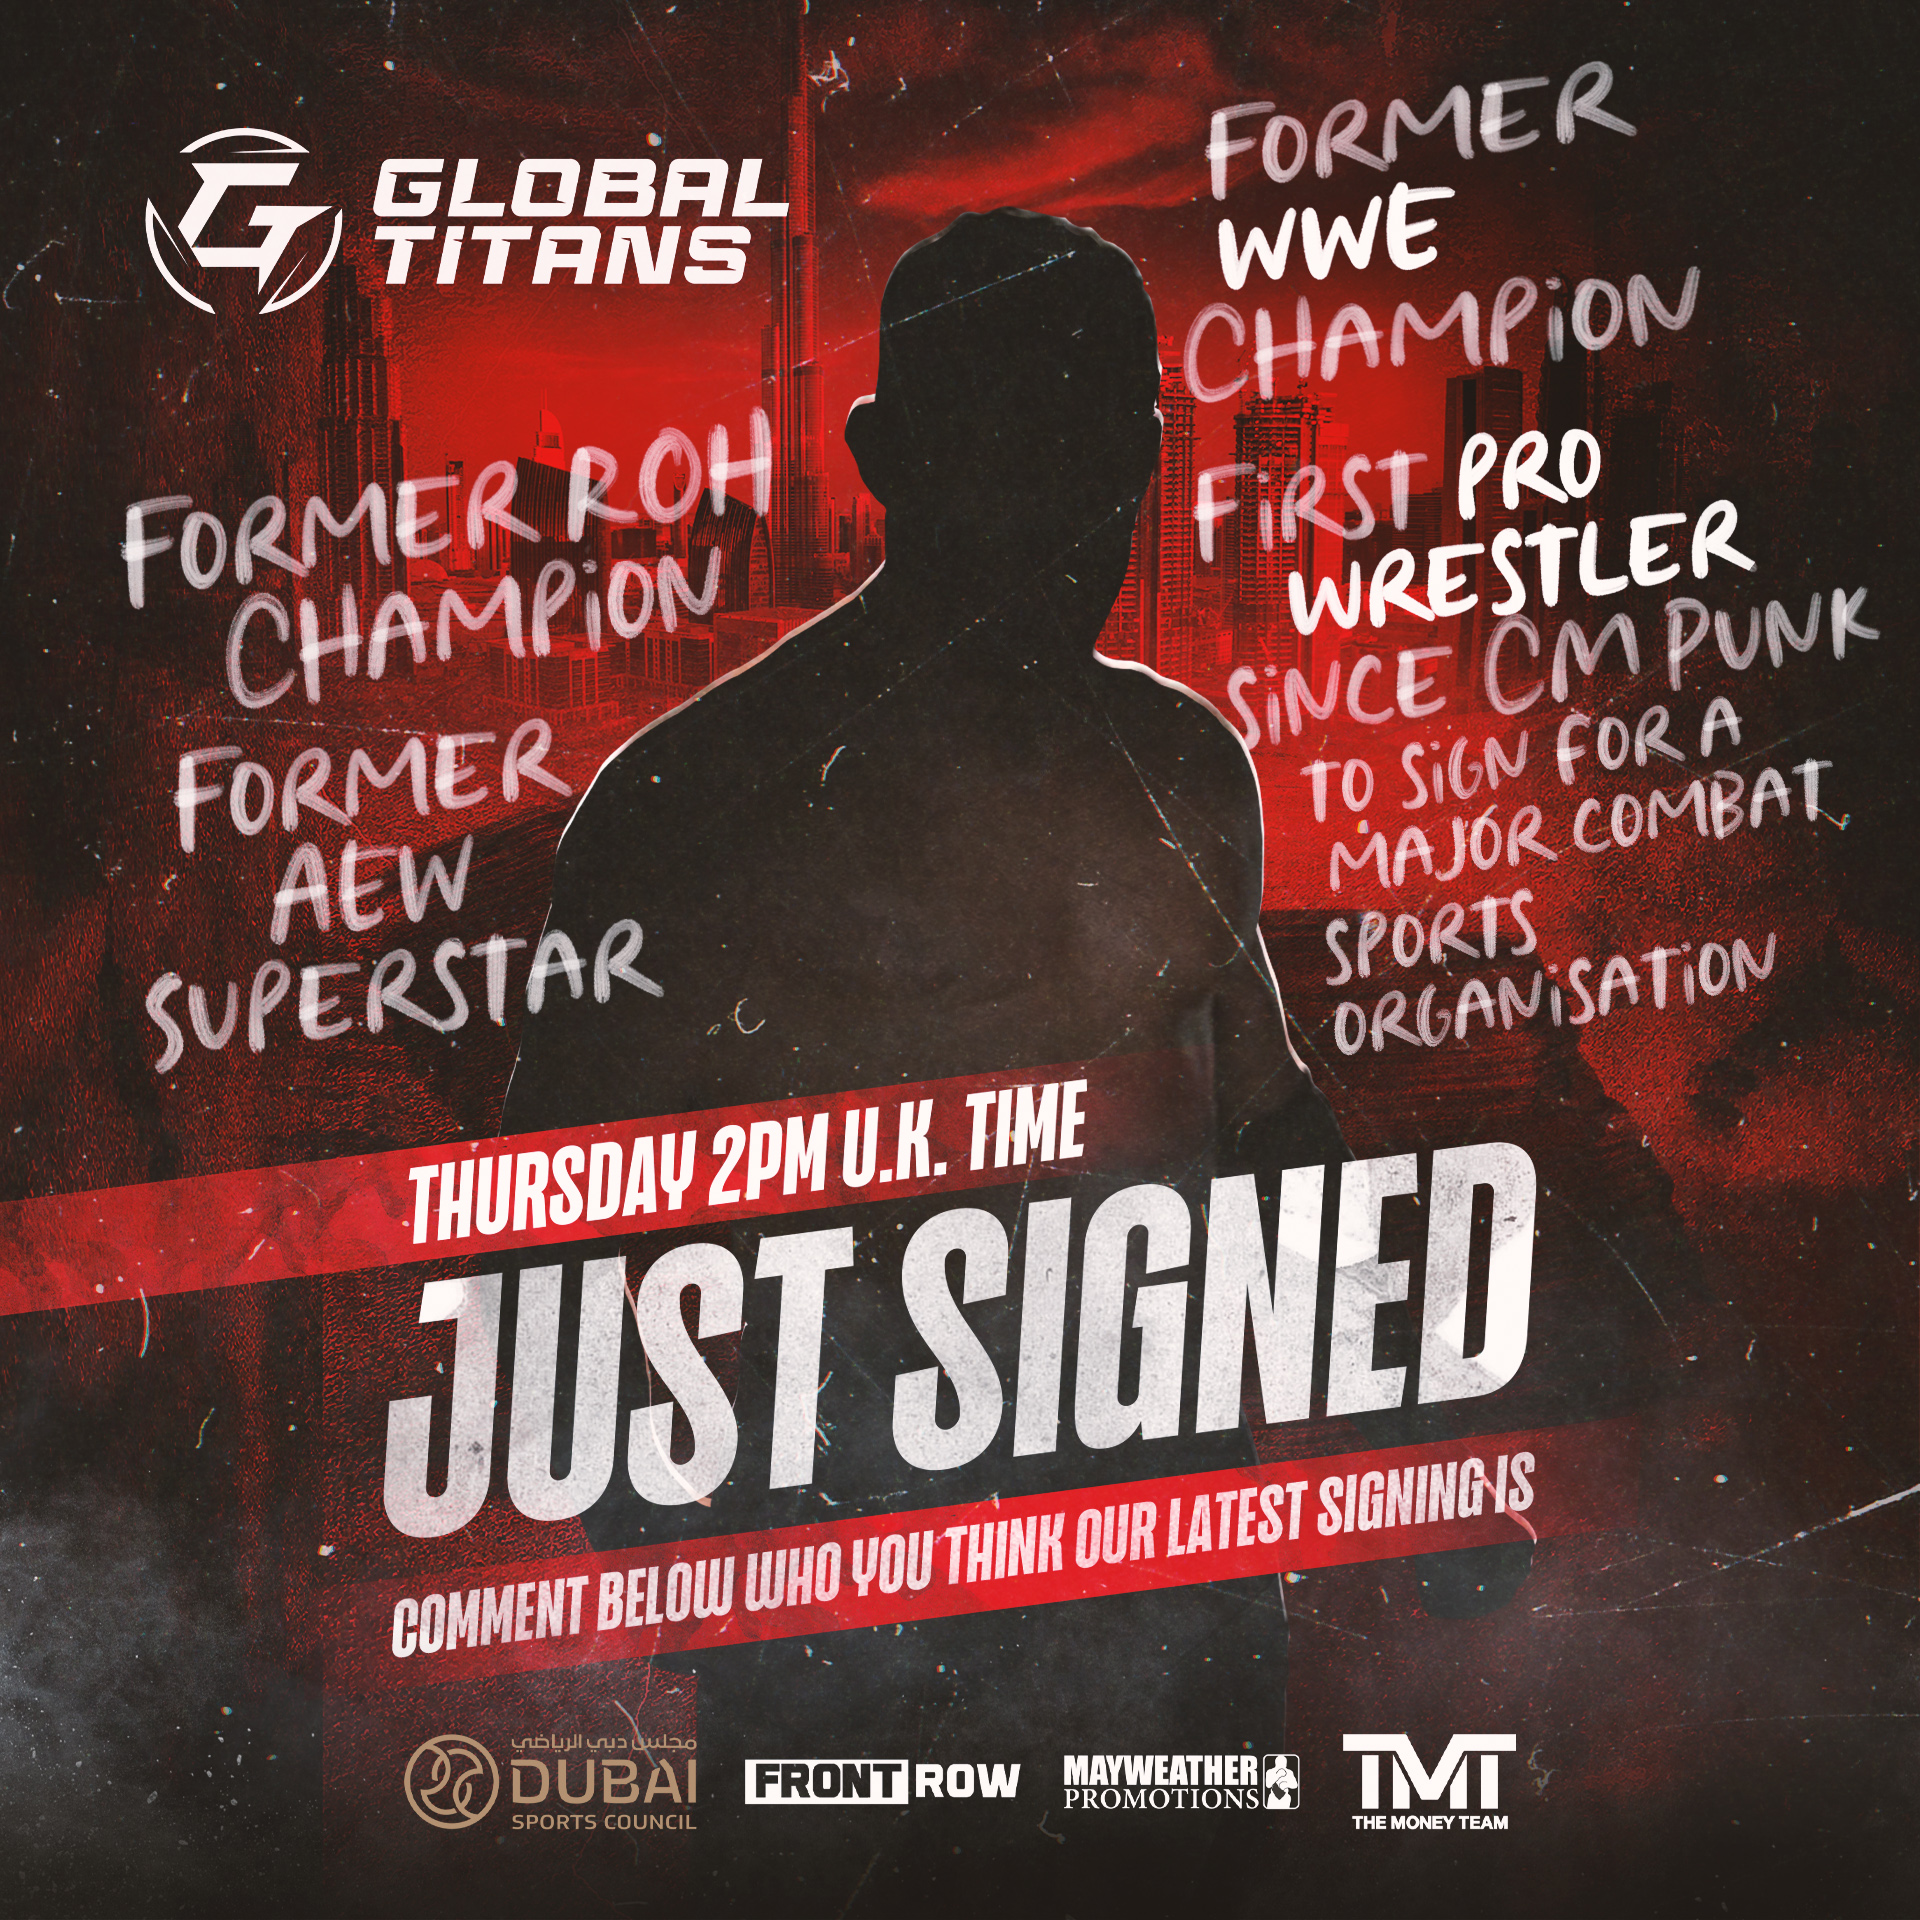 Global Titans Fight Series auf Twitter „Guess Who? 👤 WWE ✓ AEW ✓ ROH ✓ BOXING..